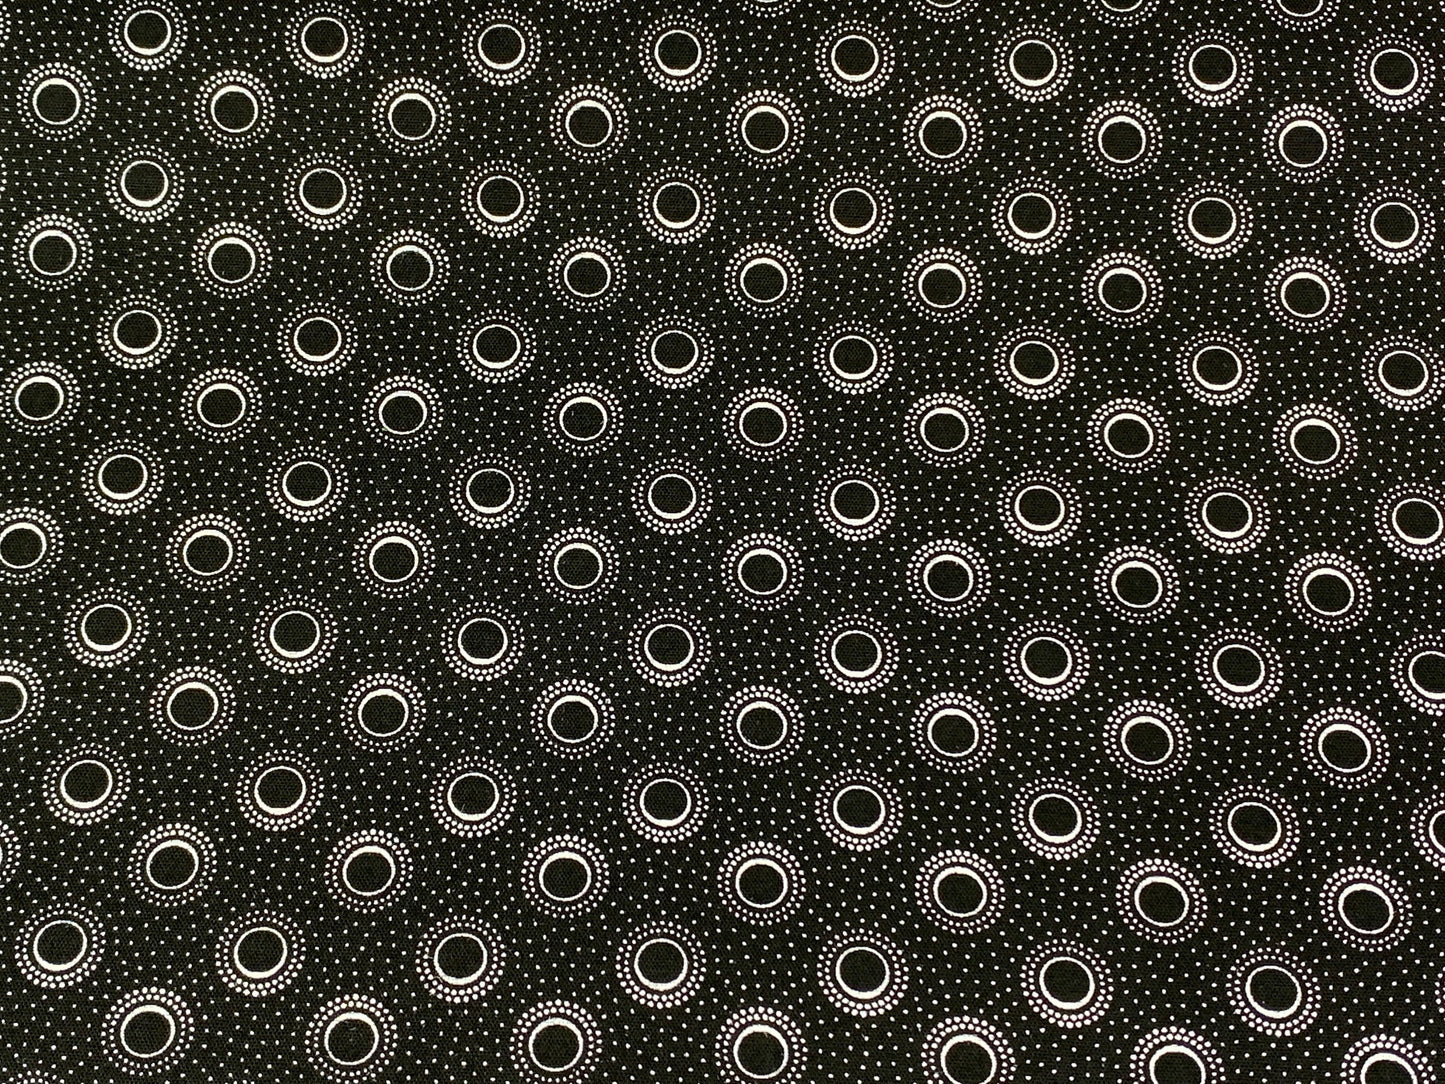 South African Shweshwe Fabric by the YARD. DaGama 3 Cats Black & White Coronas. 100% Cotton Fabric for Sewing, Quilting, Apparel, Home Decor